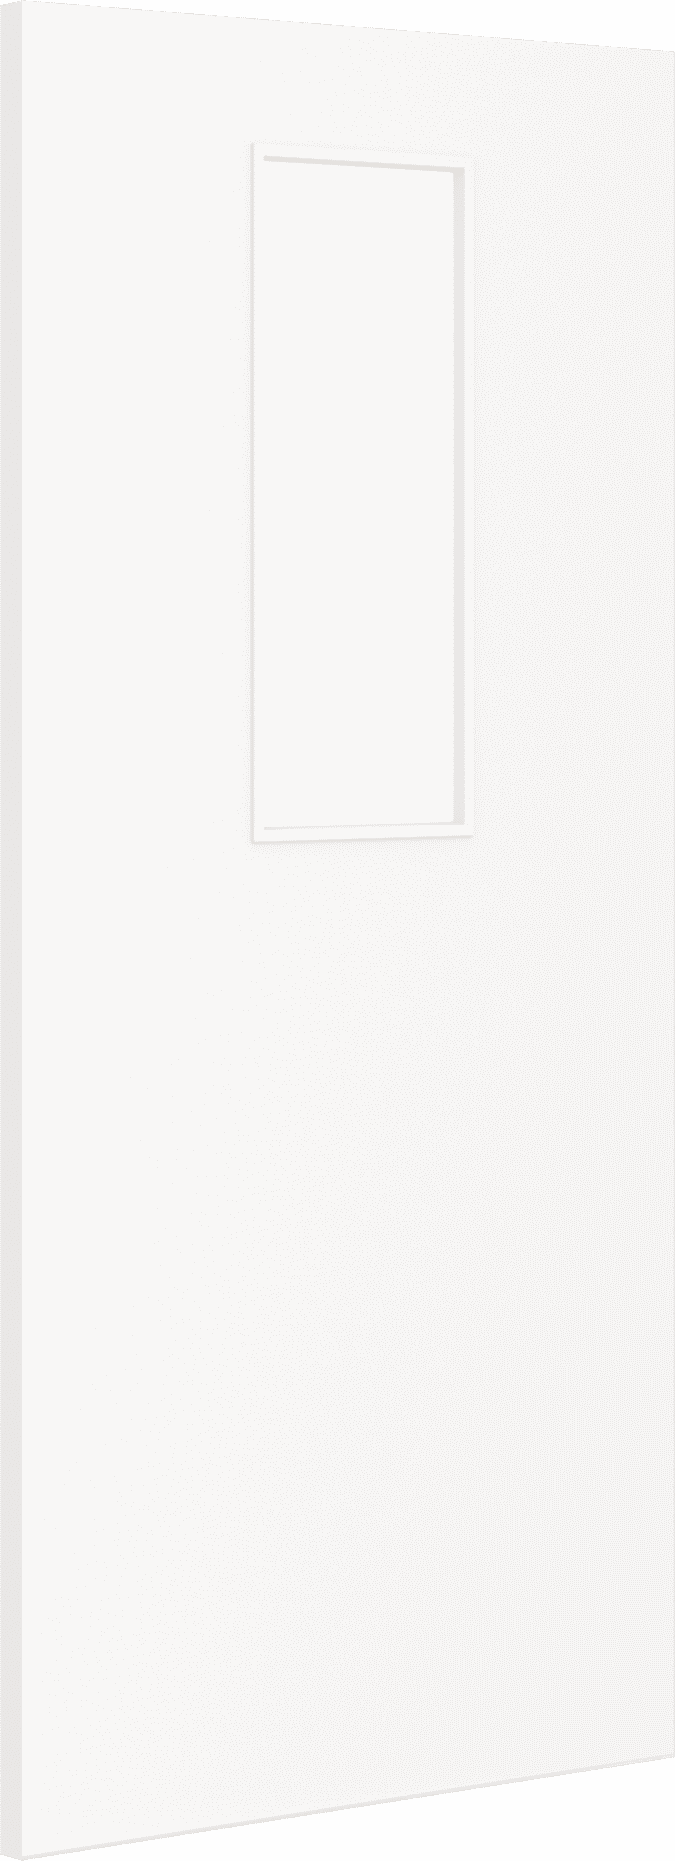 1981mm x 610mm x 44mm (24") Architectural Paint Grade White 14 Clear Glazed Fire Door Blank